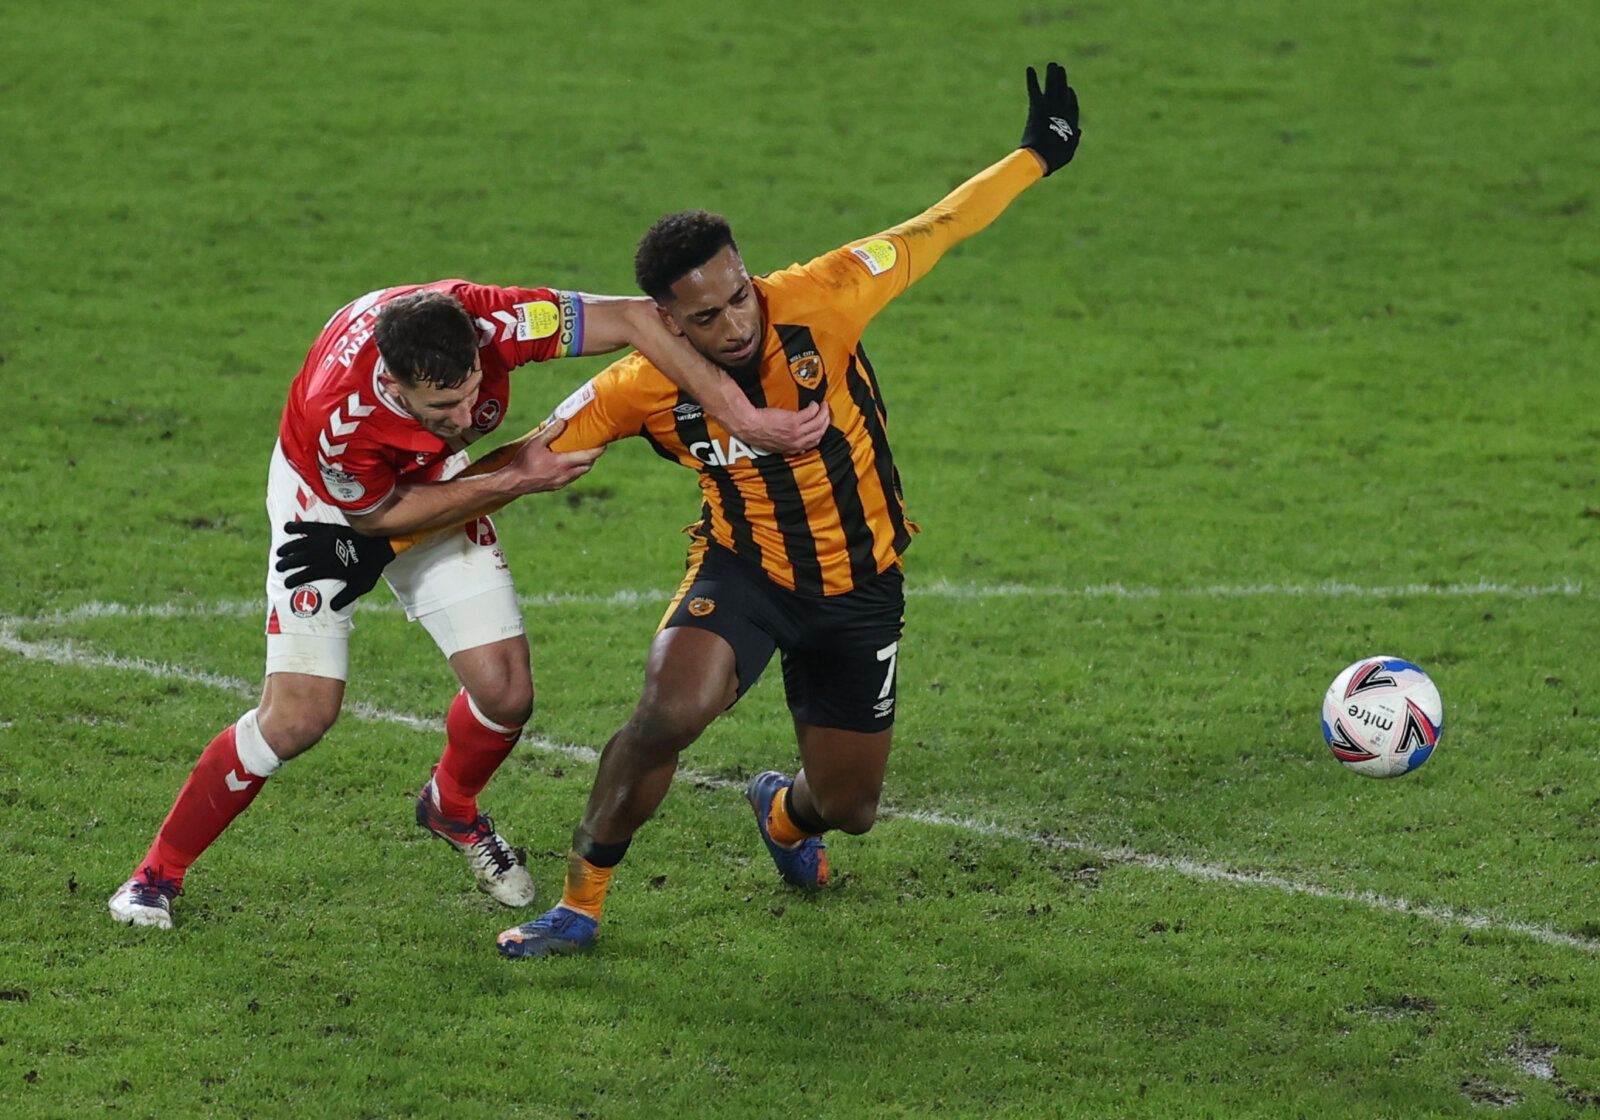 Soccer Football - League One - Hull City v Charlton Athletic - KCOM Stadium, Hull, Britain - January 2, 2021 Hull City's Malik Wilks in action with Charlton Athletic's Jason Pearce Action Images/Lee Smith EDITORIAL USE ONLY. No use with unauthorized audio, video, data, fixture lists, club/league logos or 'live' services. Online in-match use limited to 75 images, no video emulation. No use in betting, games or single club /league/player publications.  Please contact your account representative fo